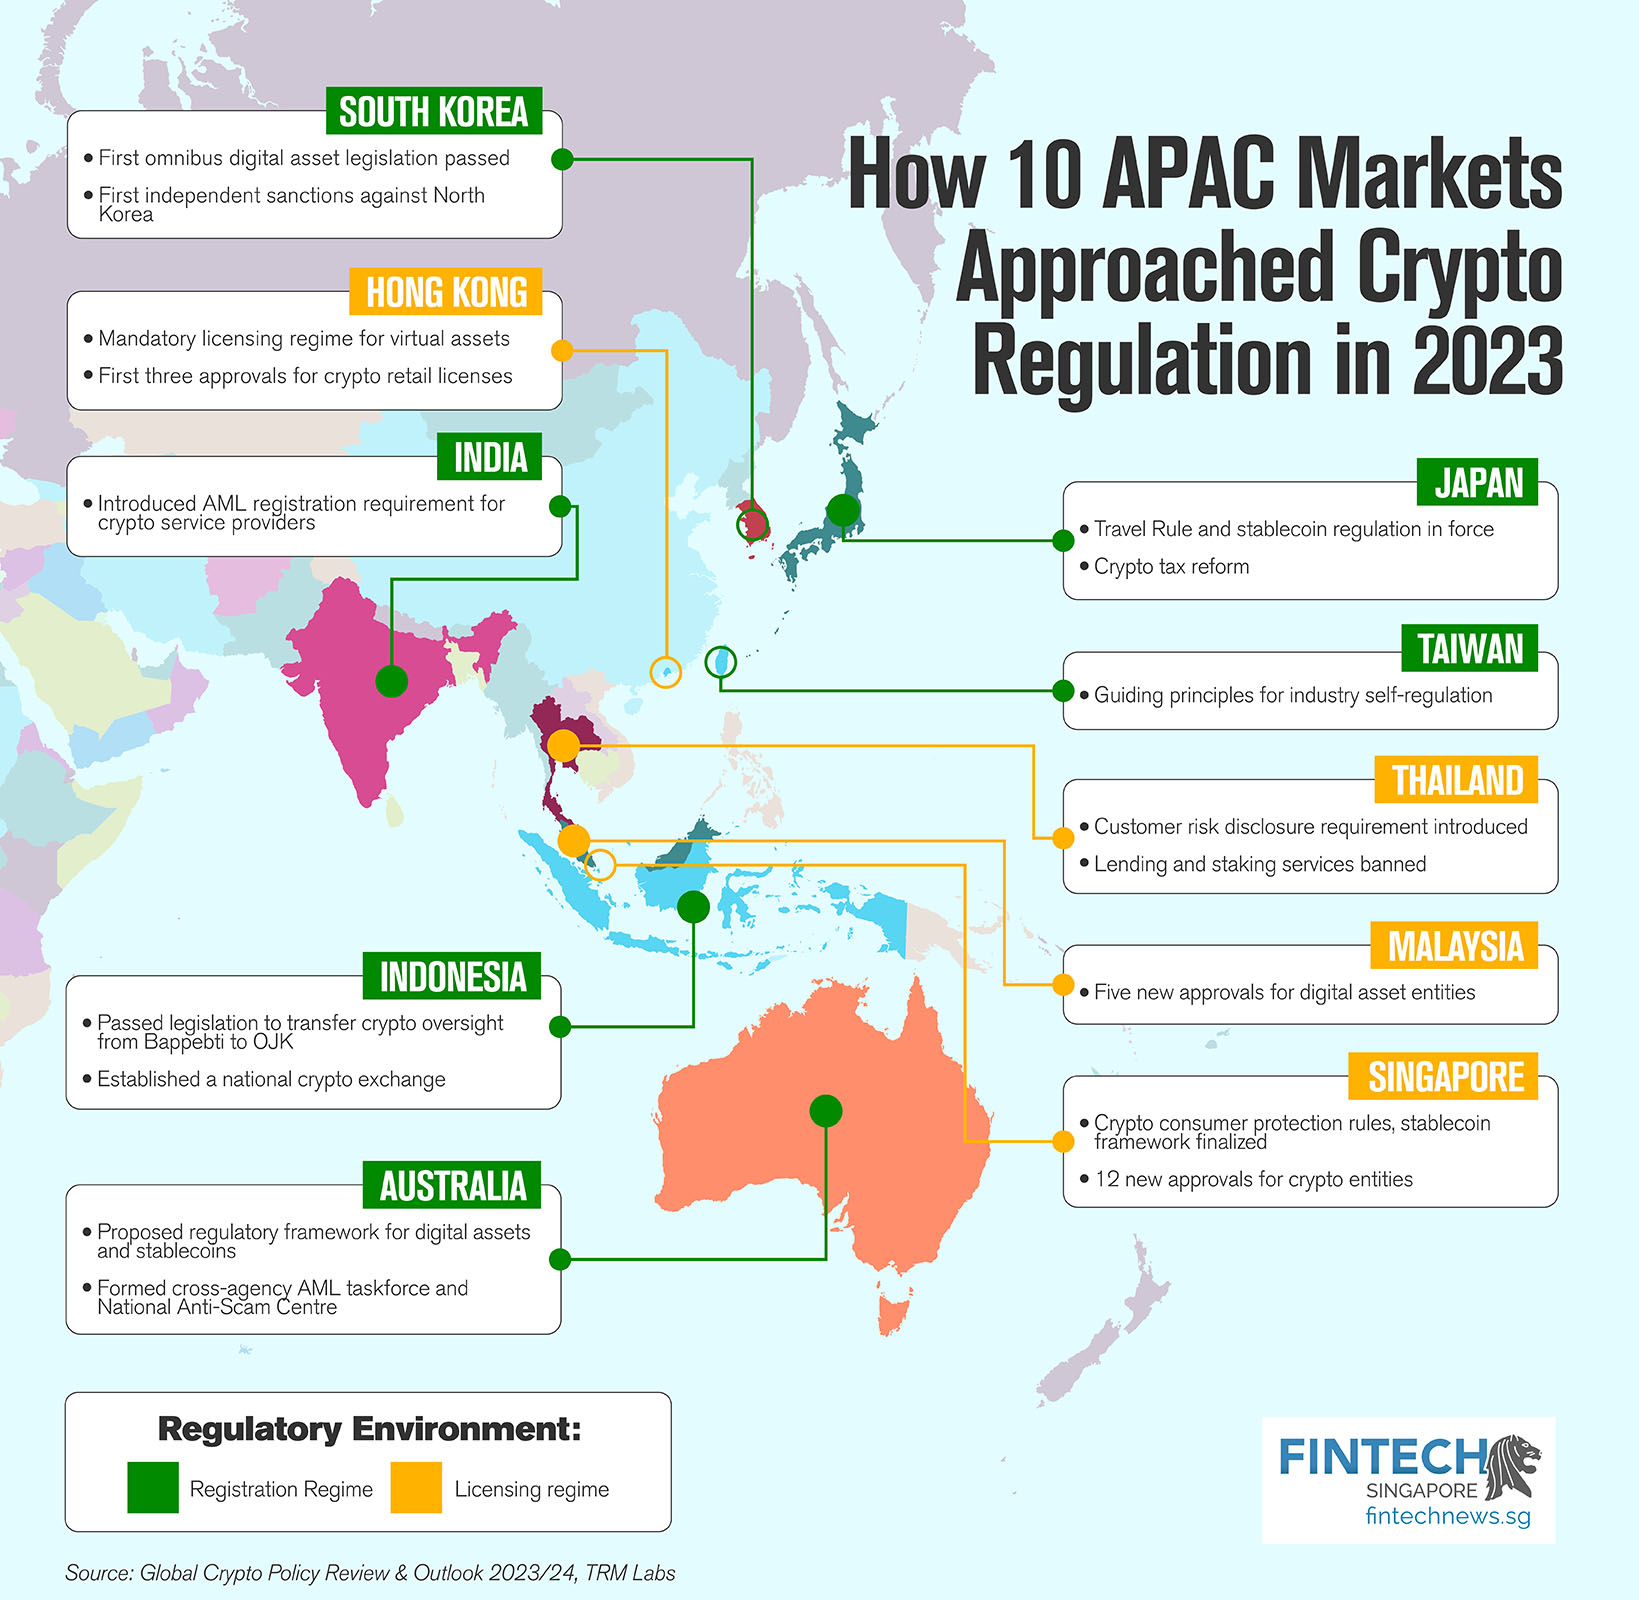 Here’s How 10 Apac Markets Are Approaching Crypto Regulation